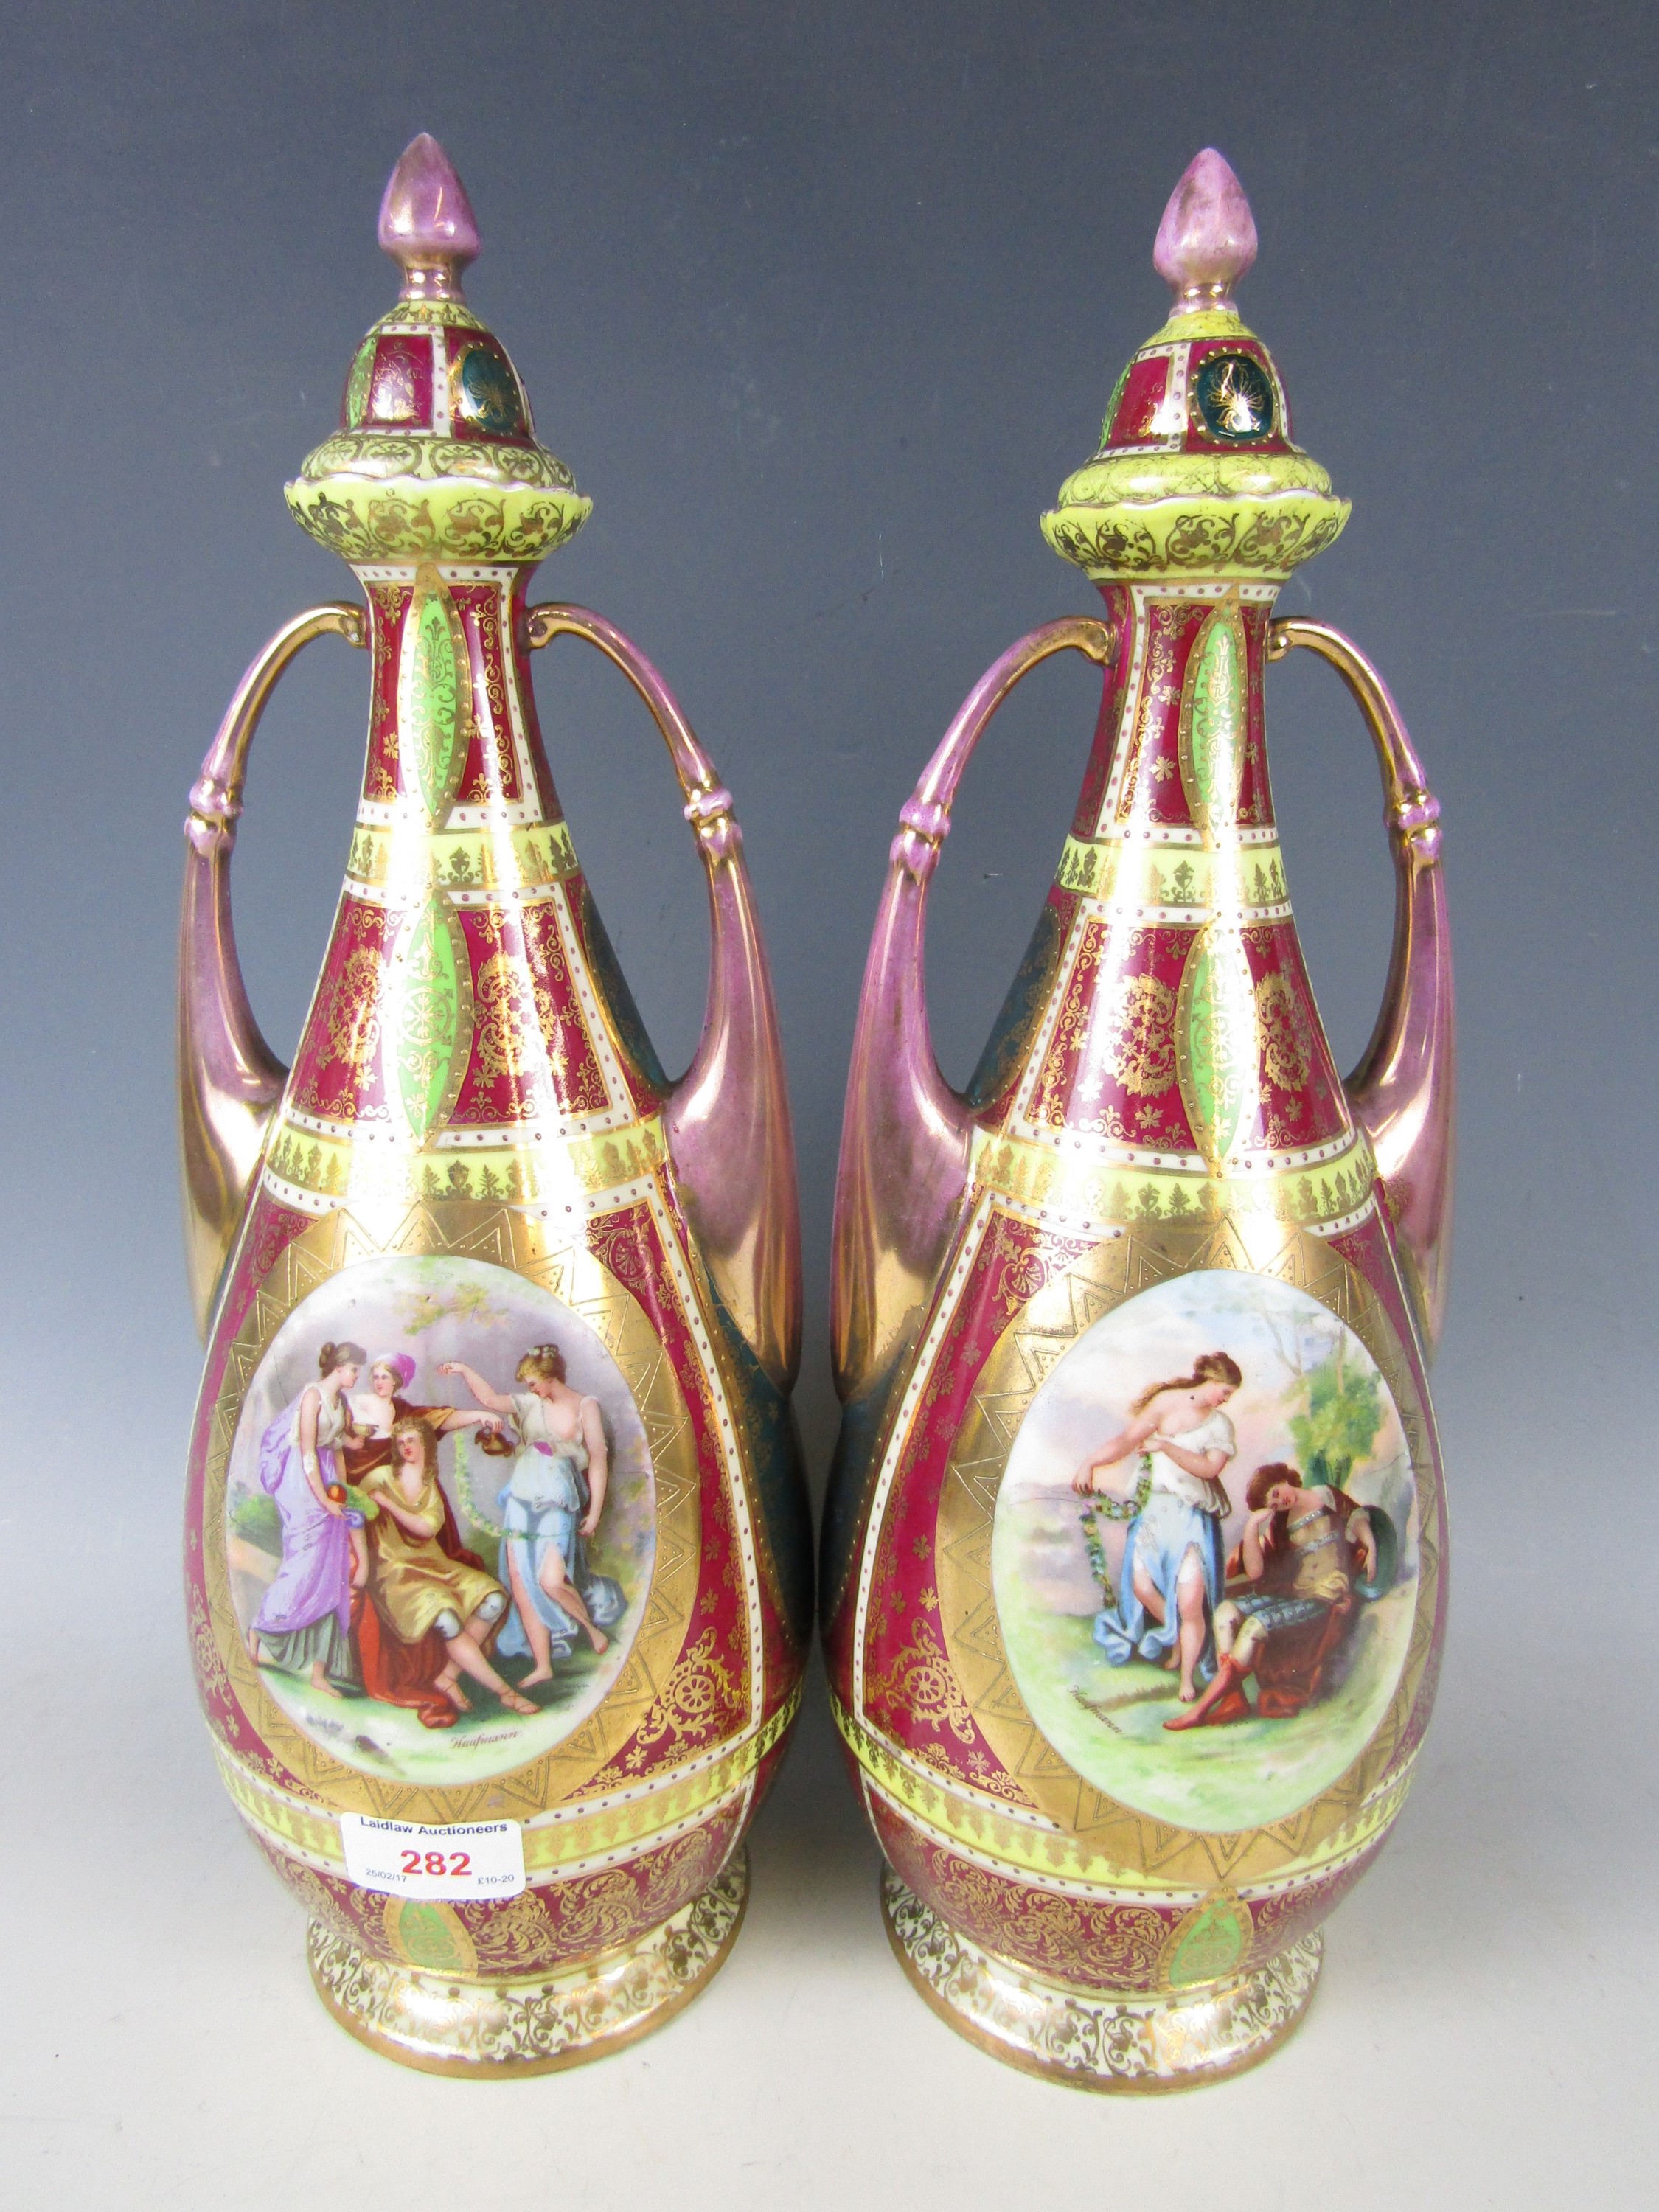 A large pair of 19th century Vienna gilt-enriched lustre porcelain vases depicting courting